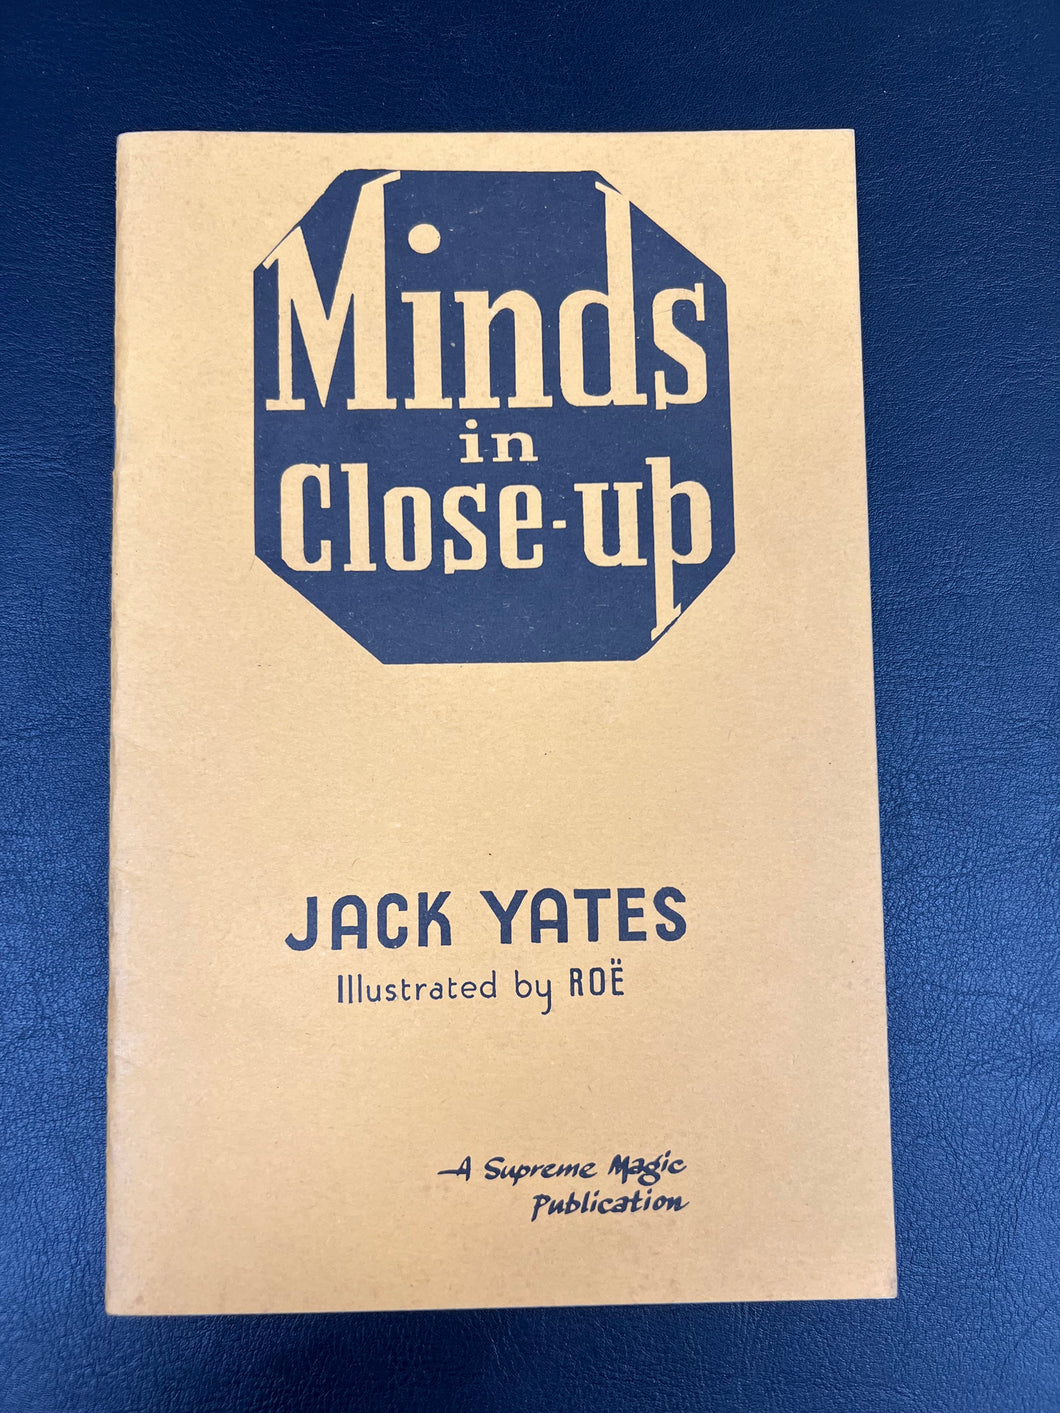 Minds in Close-up by Jack Yate